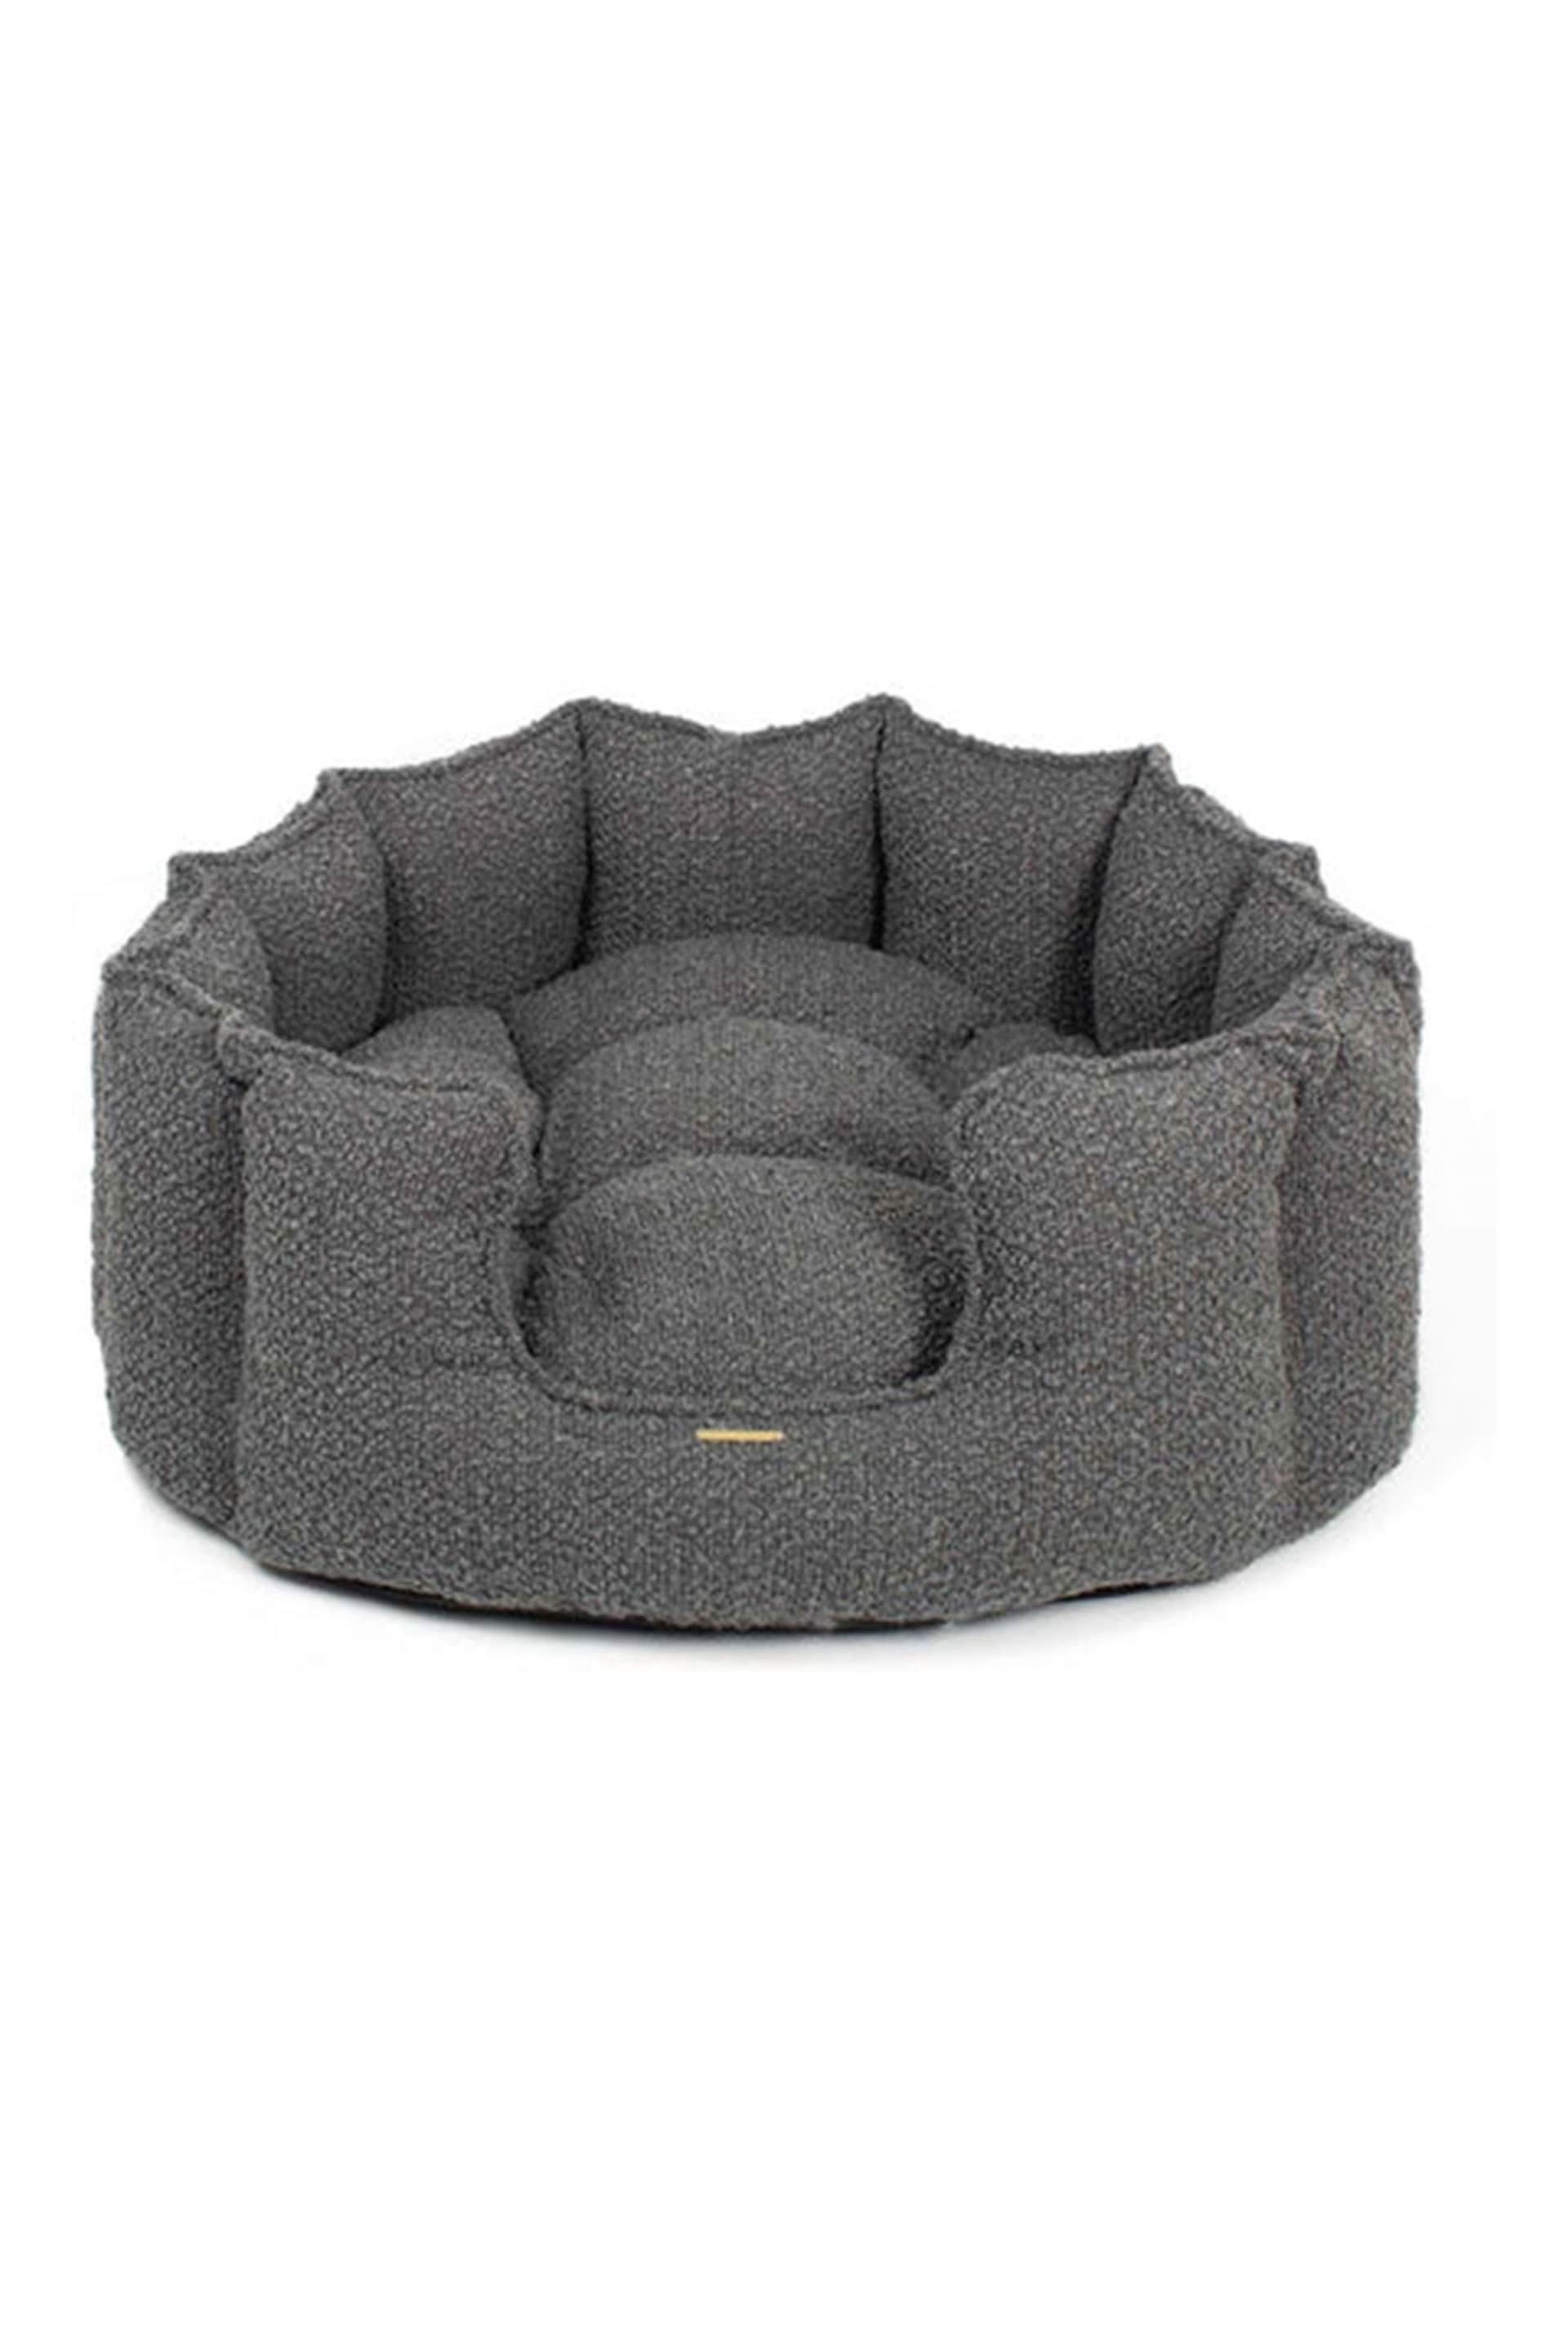 Lords and Labradors Grey High Sided Boucle Dog Bed - Image 3 of 4